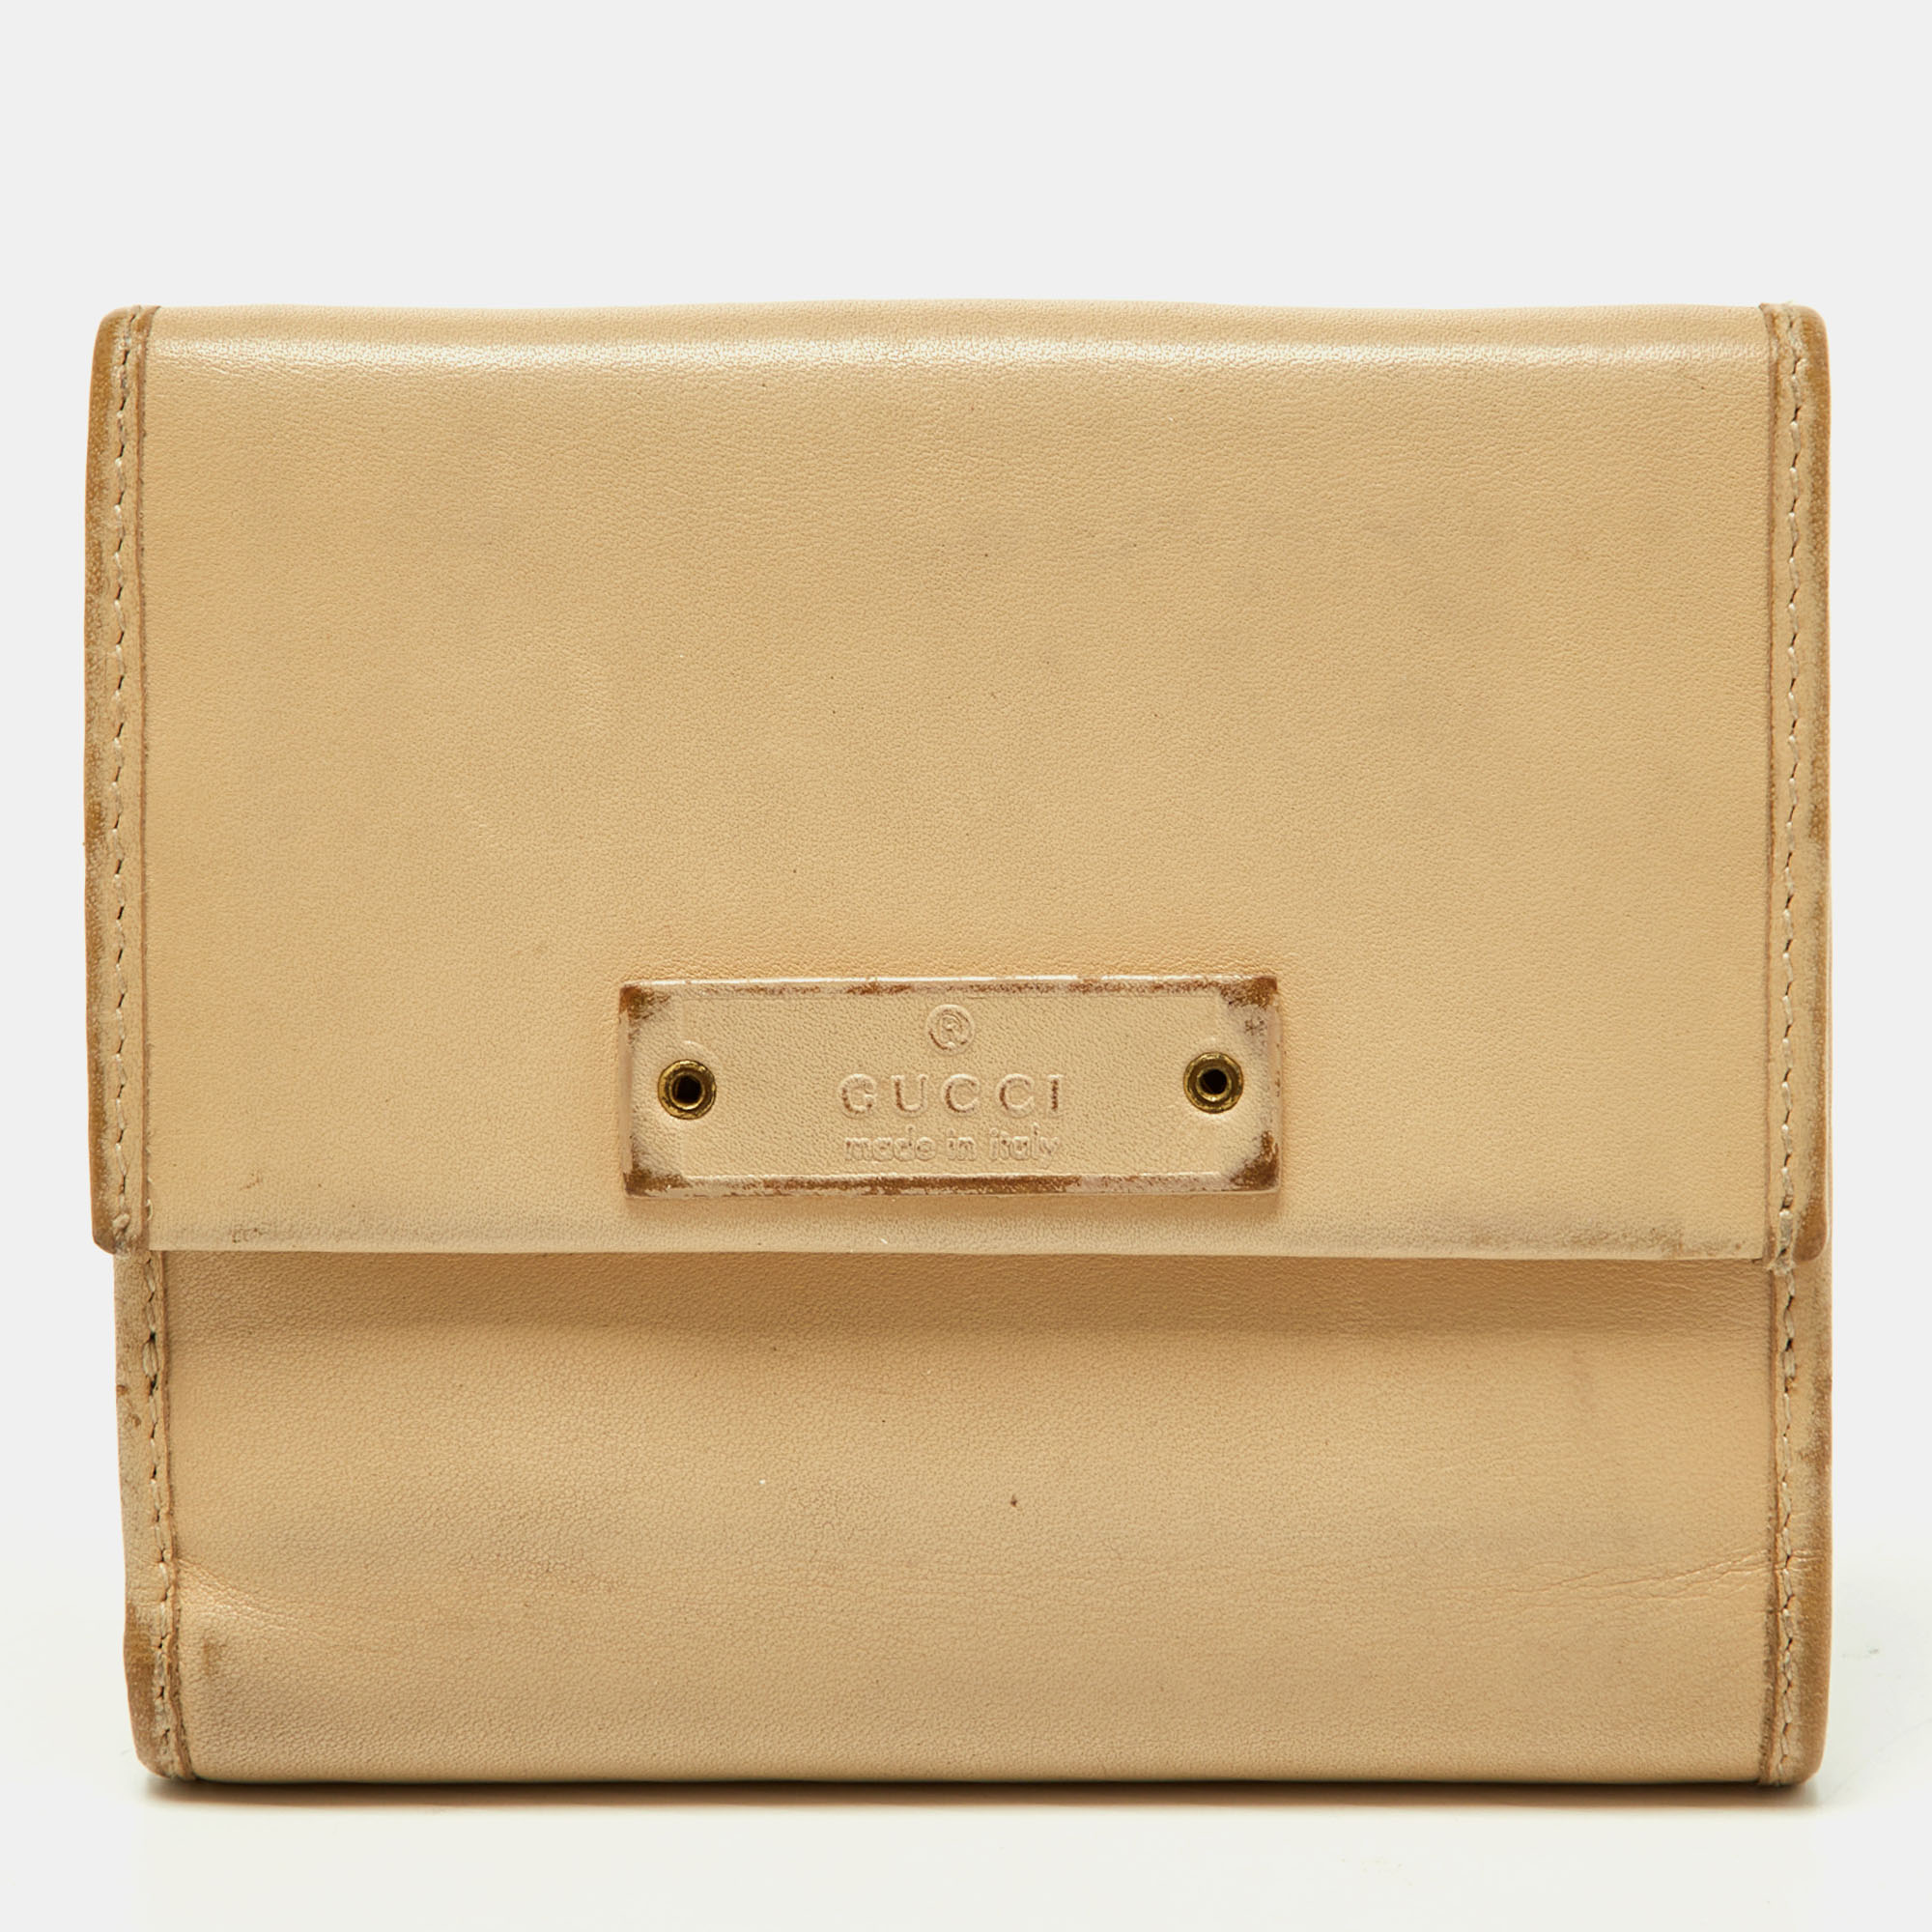 Gucci cream leather french wallet